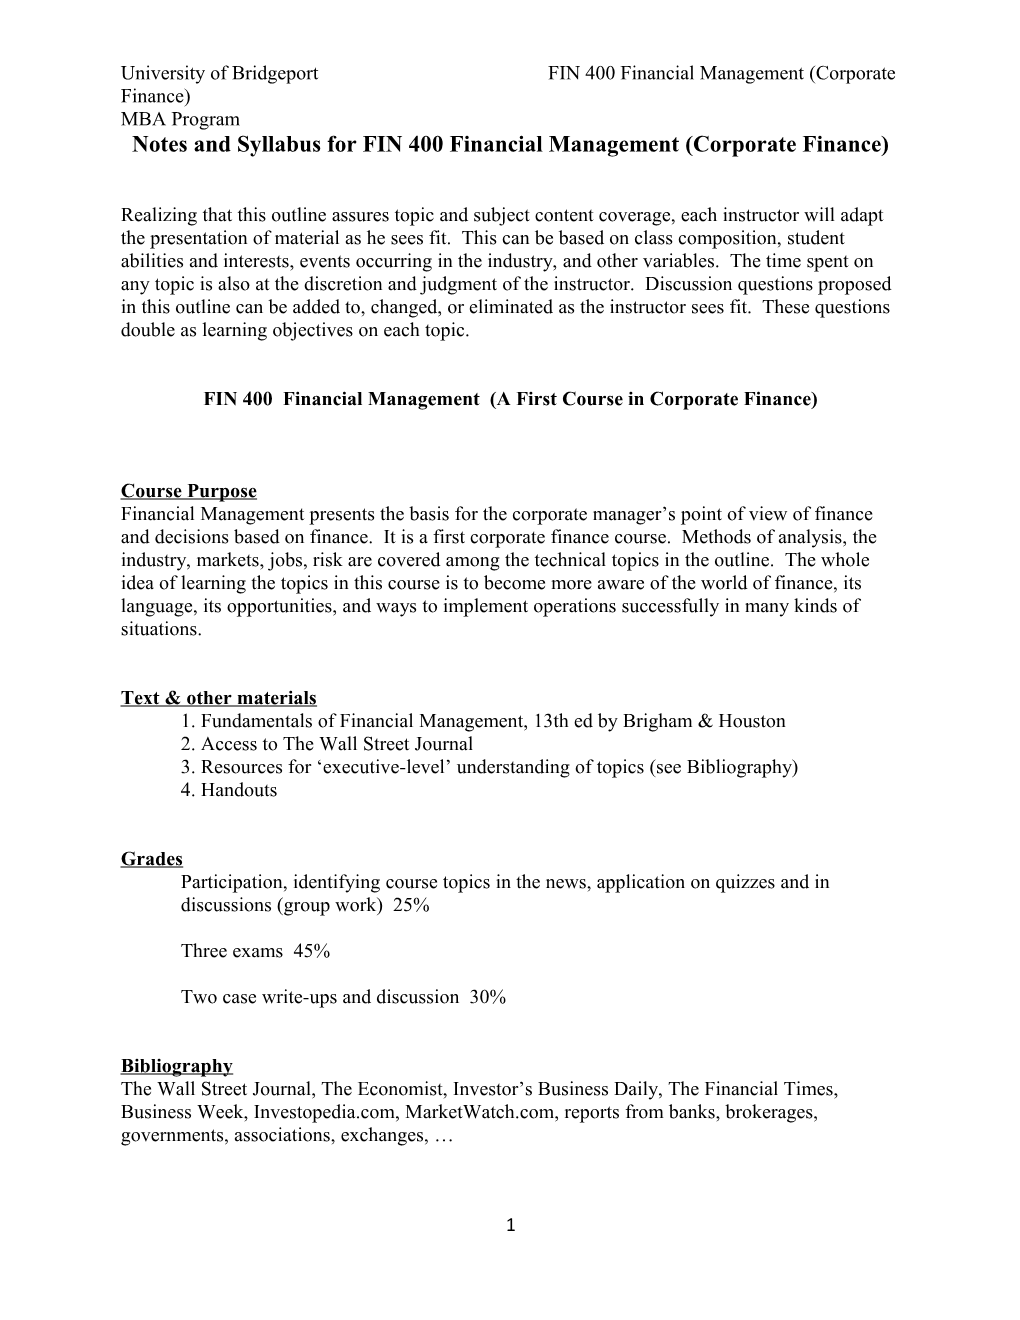 Notes and Syllabus for FIN 400 Financial Management (Corporate Finance)